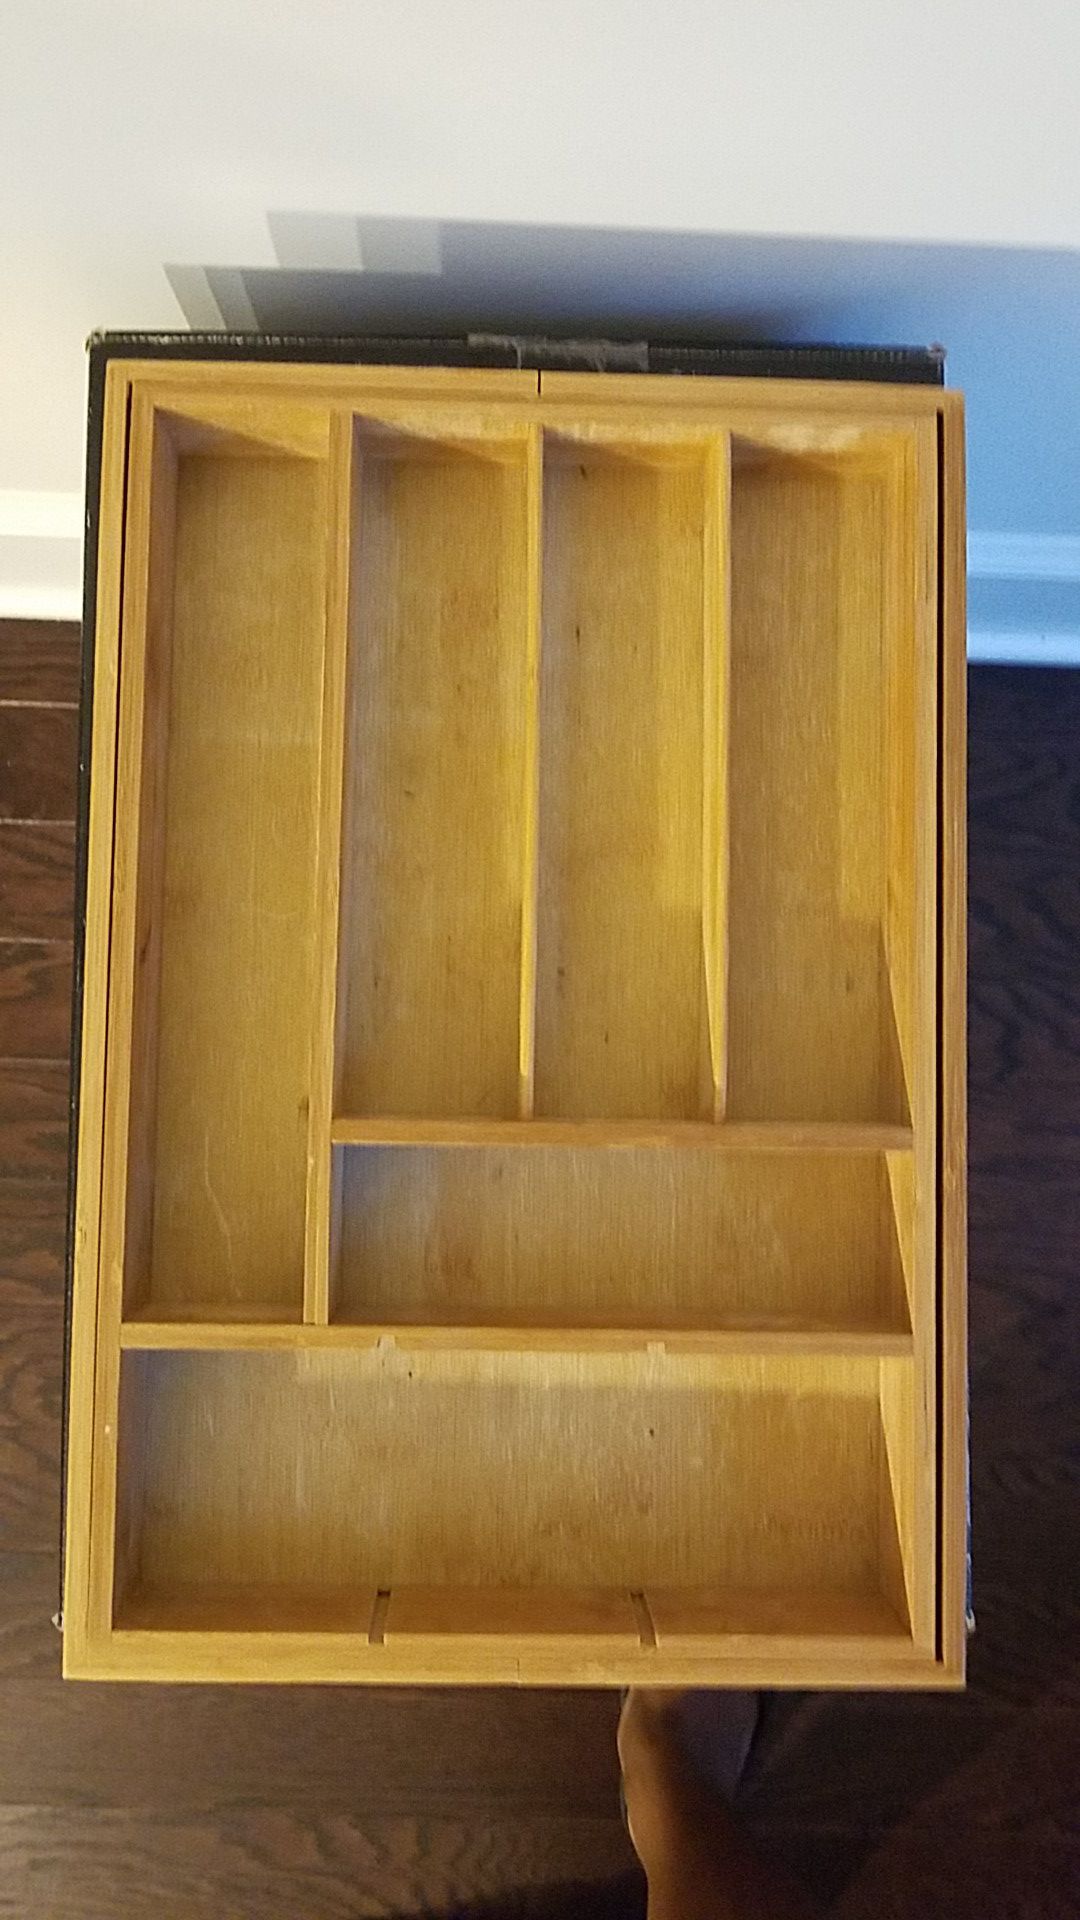 Gently Used Wooden Drawer Organizer